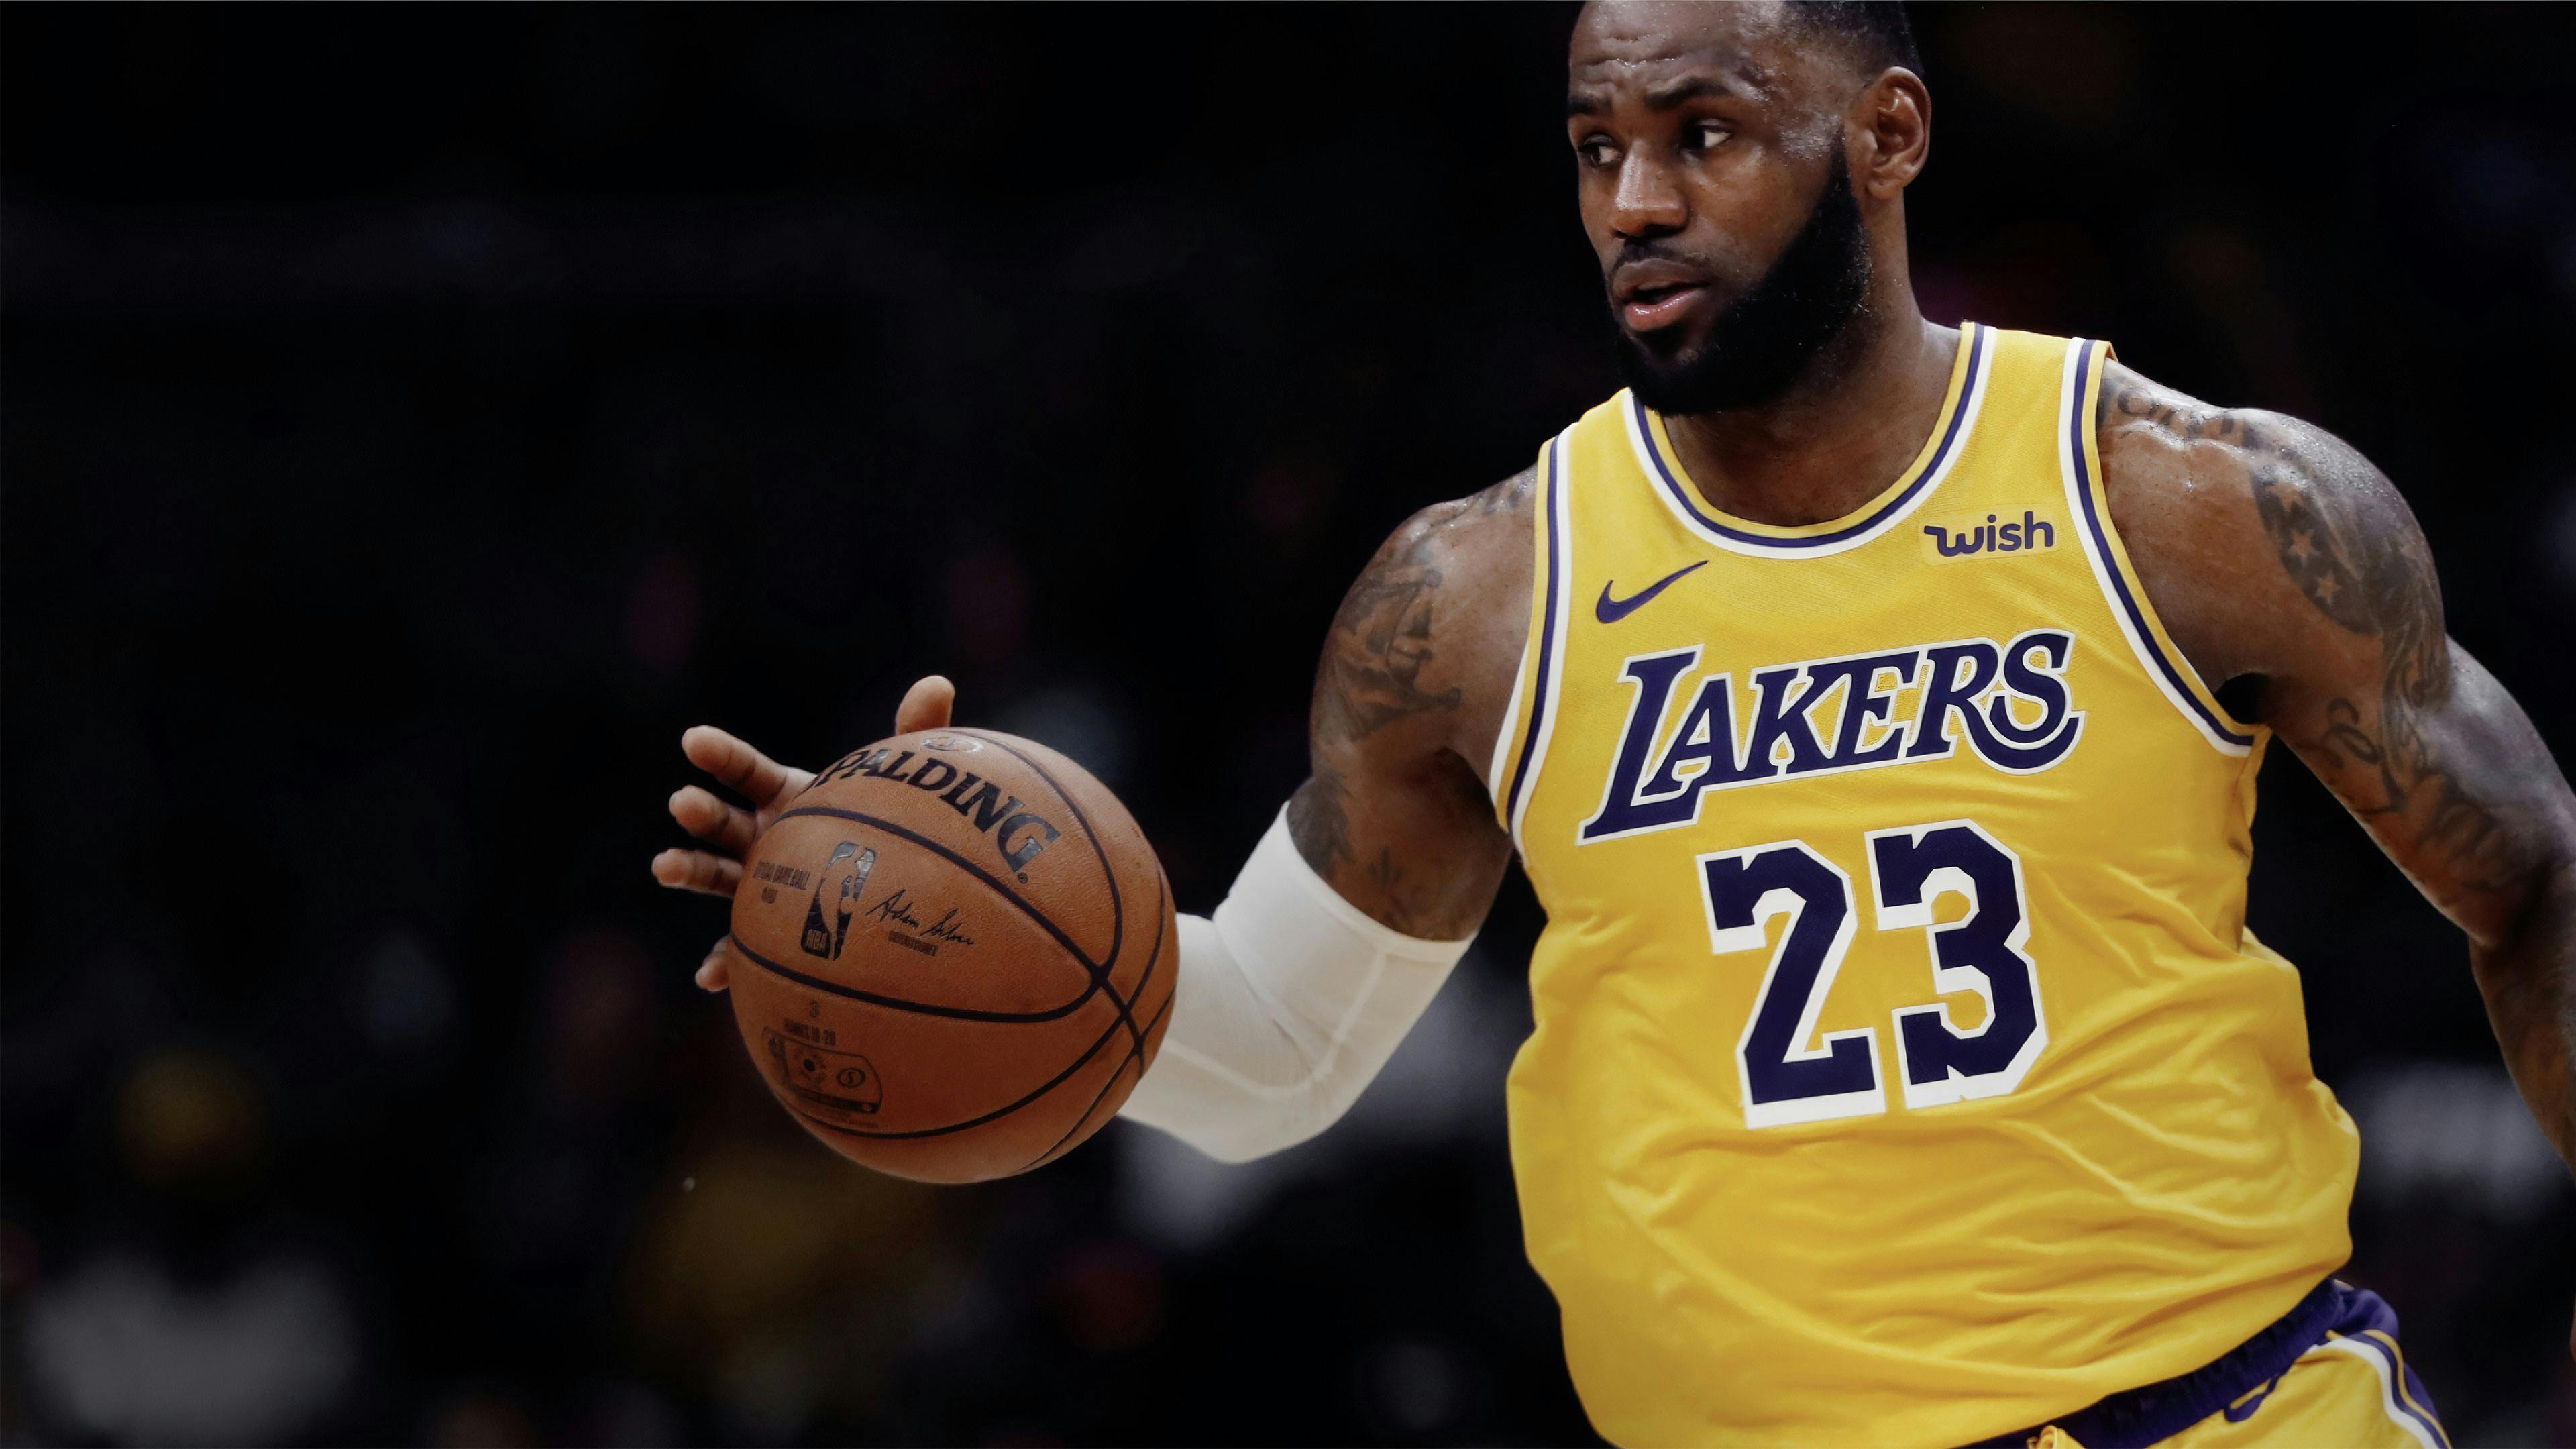 Los Angeles Lakers — 26% bump in fan engagement on Lakers.com.